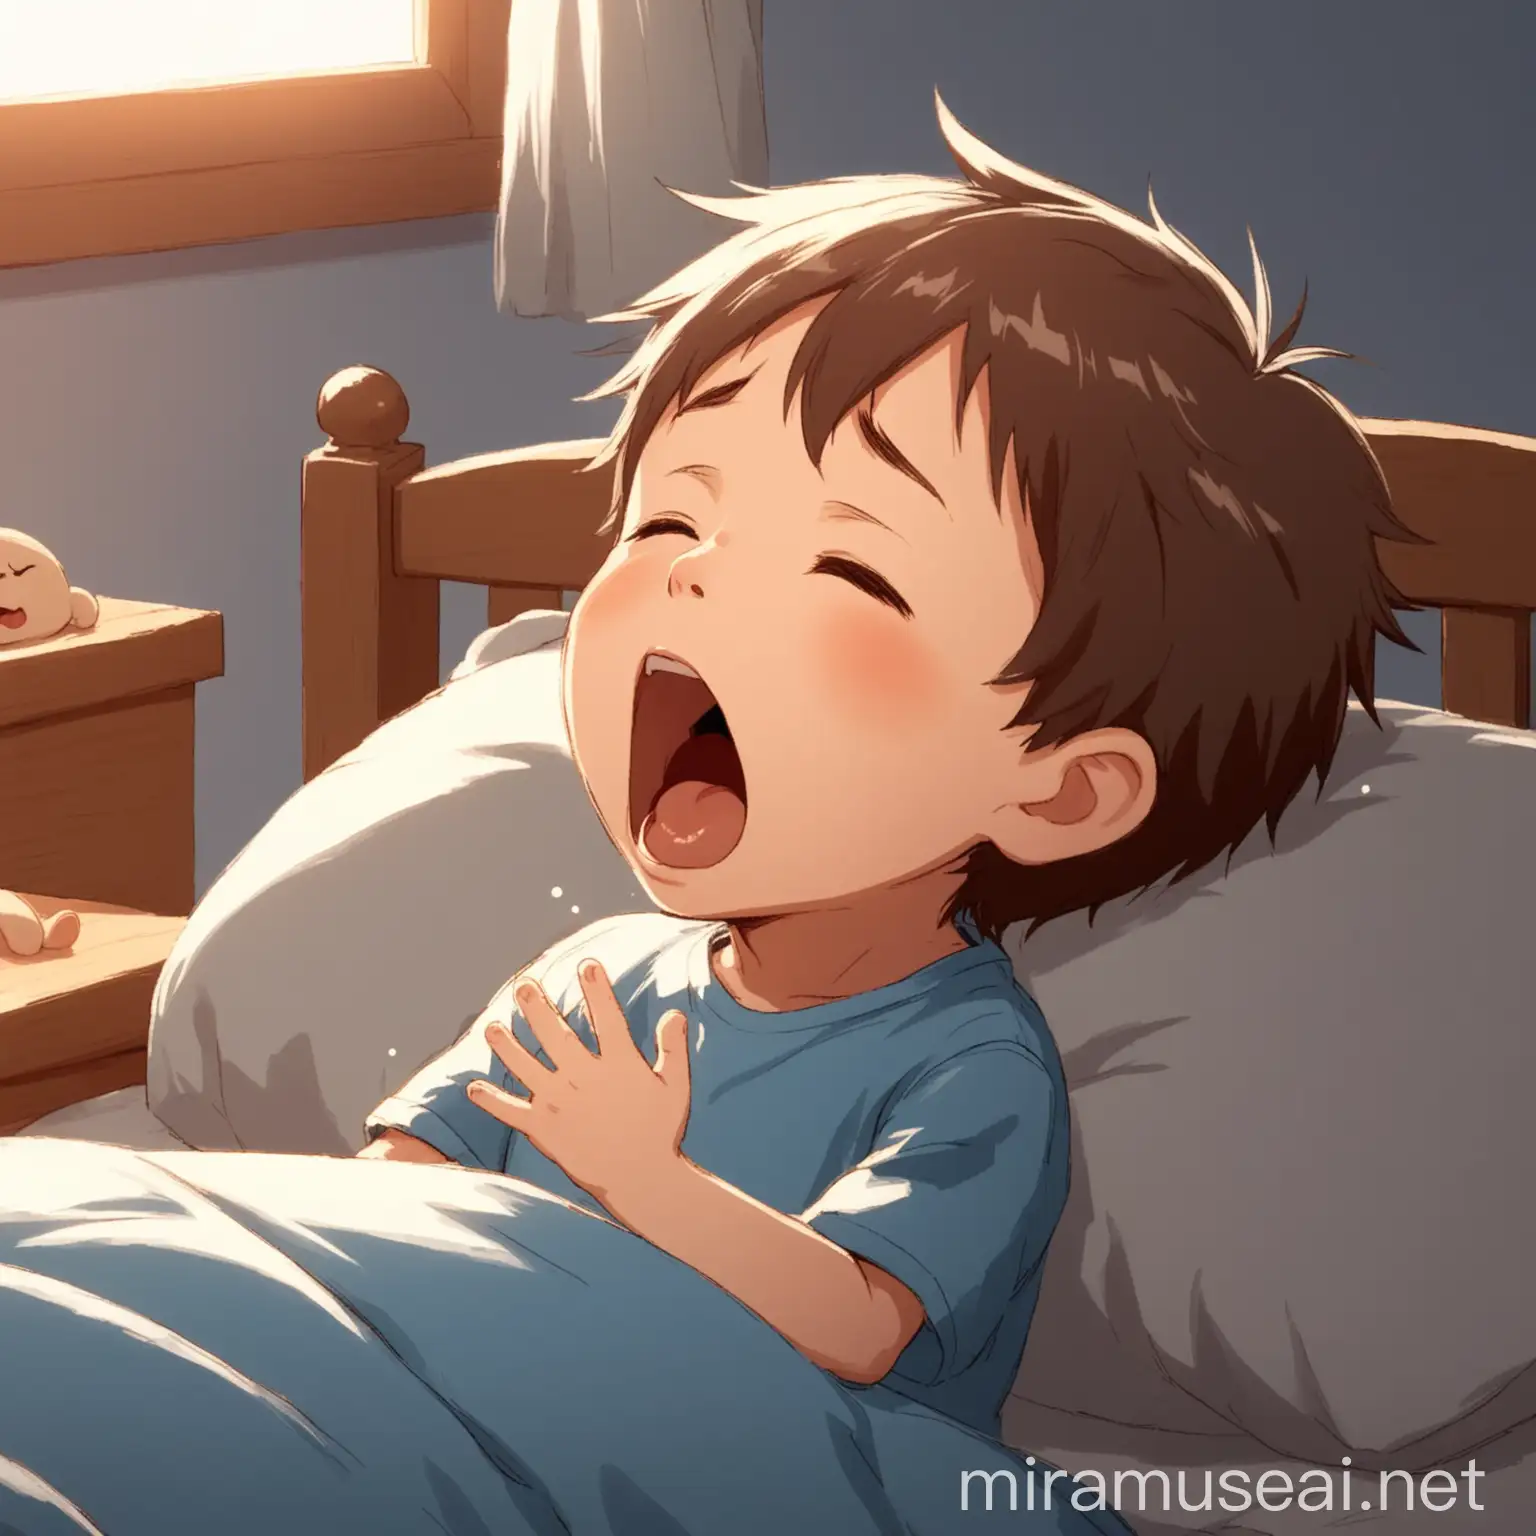 animated little boy yawning early in the morning